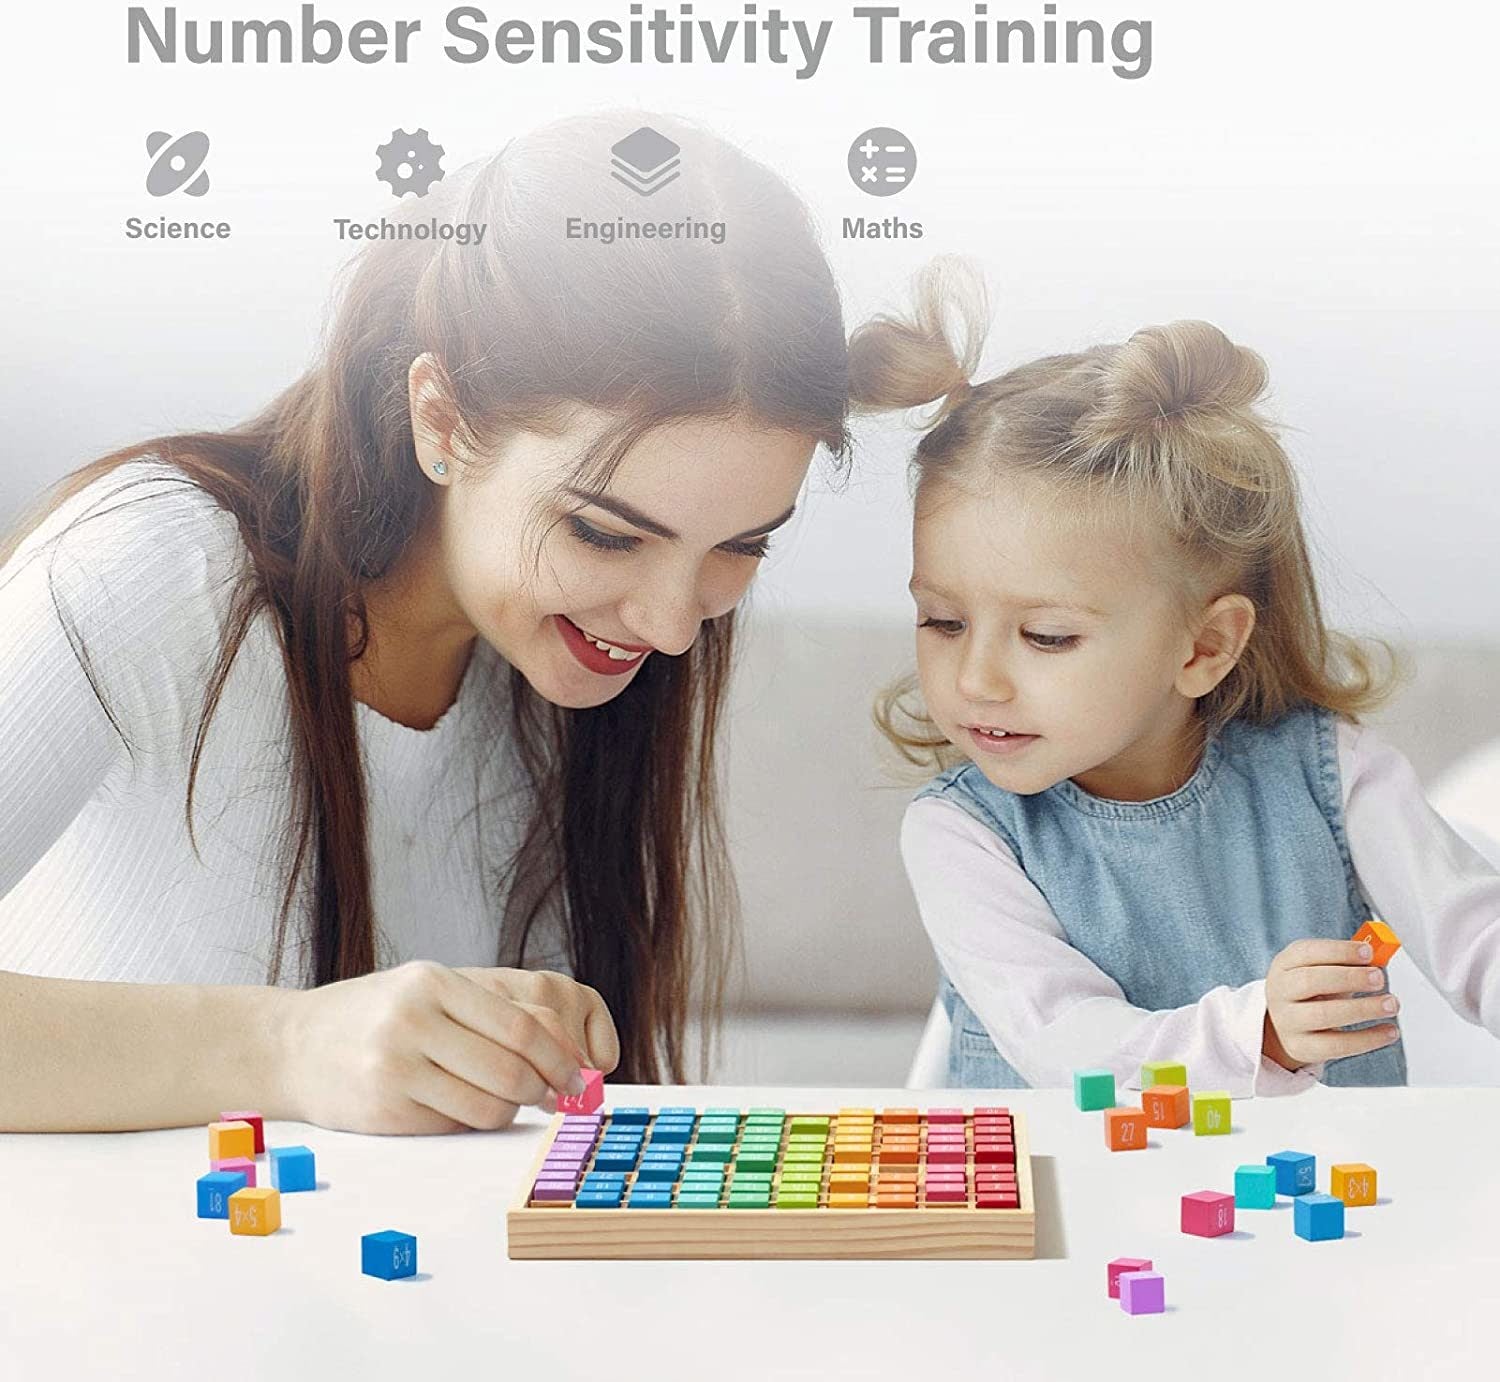 Wooden Multiplication & Math Table Board Game, Kids Montessori Math Manipulatives Learning Toys Gift, Aged 3 Years Old and Up - 100 Wooden Counting Blocks